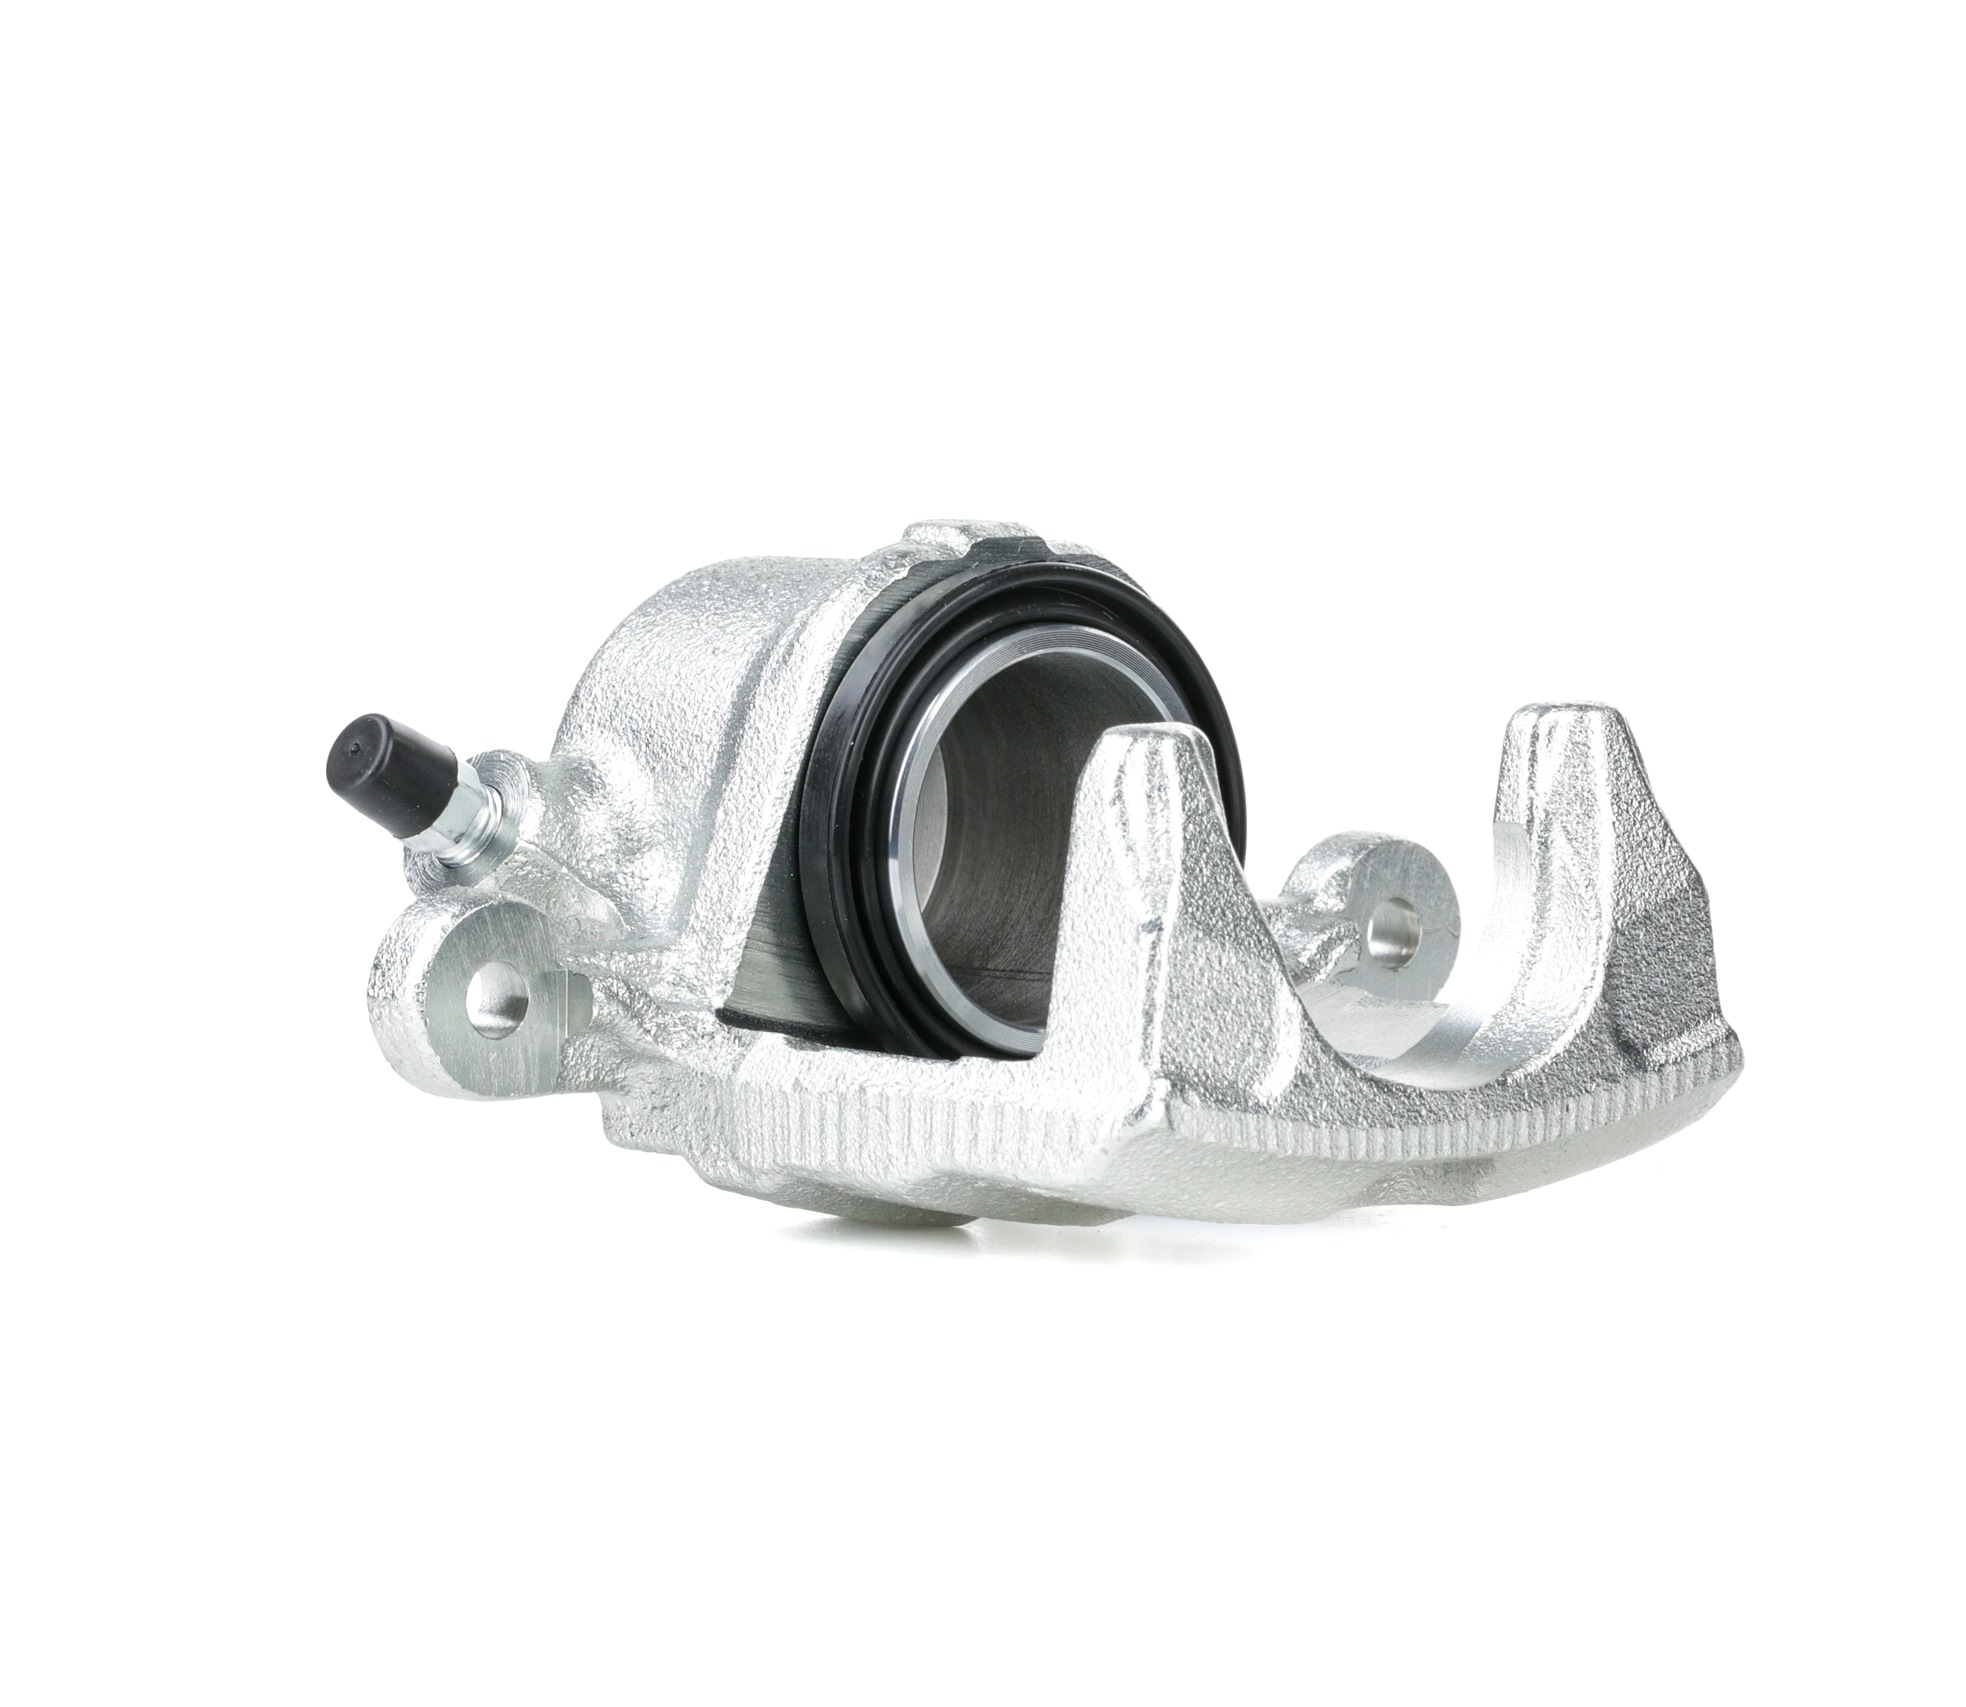 SKBC-0460596 STARK Brake calipers SUZUKI Cast Iron, 130mm, Front Axle Right, in front of axle, without holder